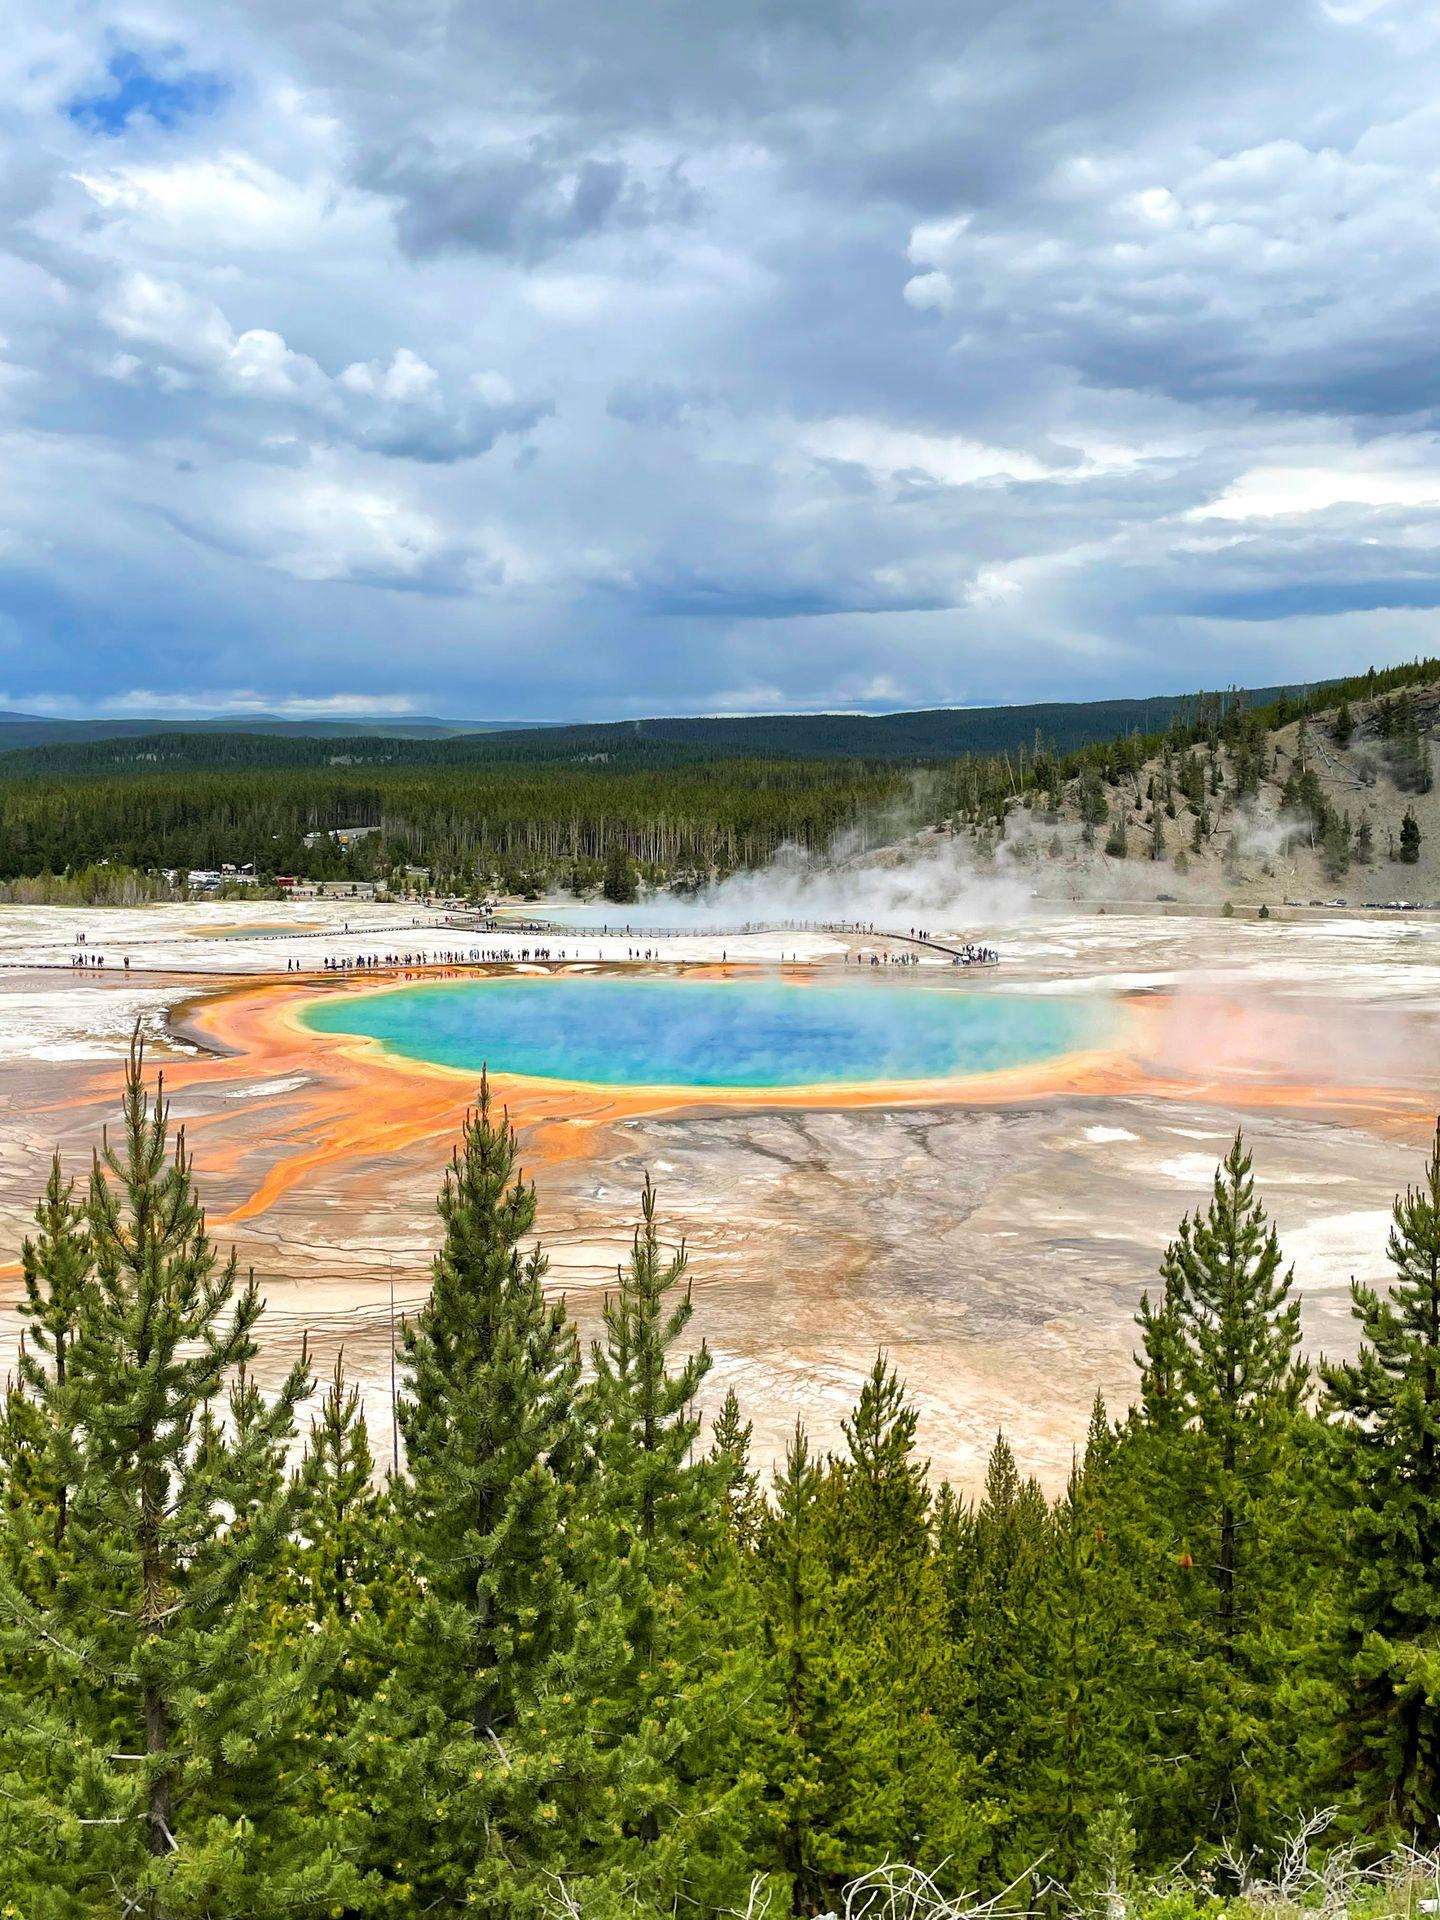 A view of the Grand Prismatic Spring from the overlook.